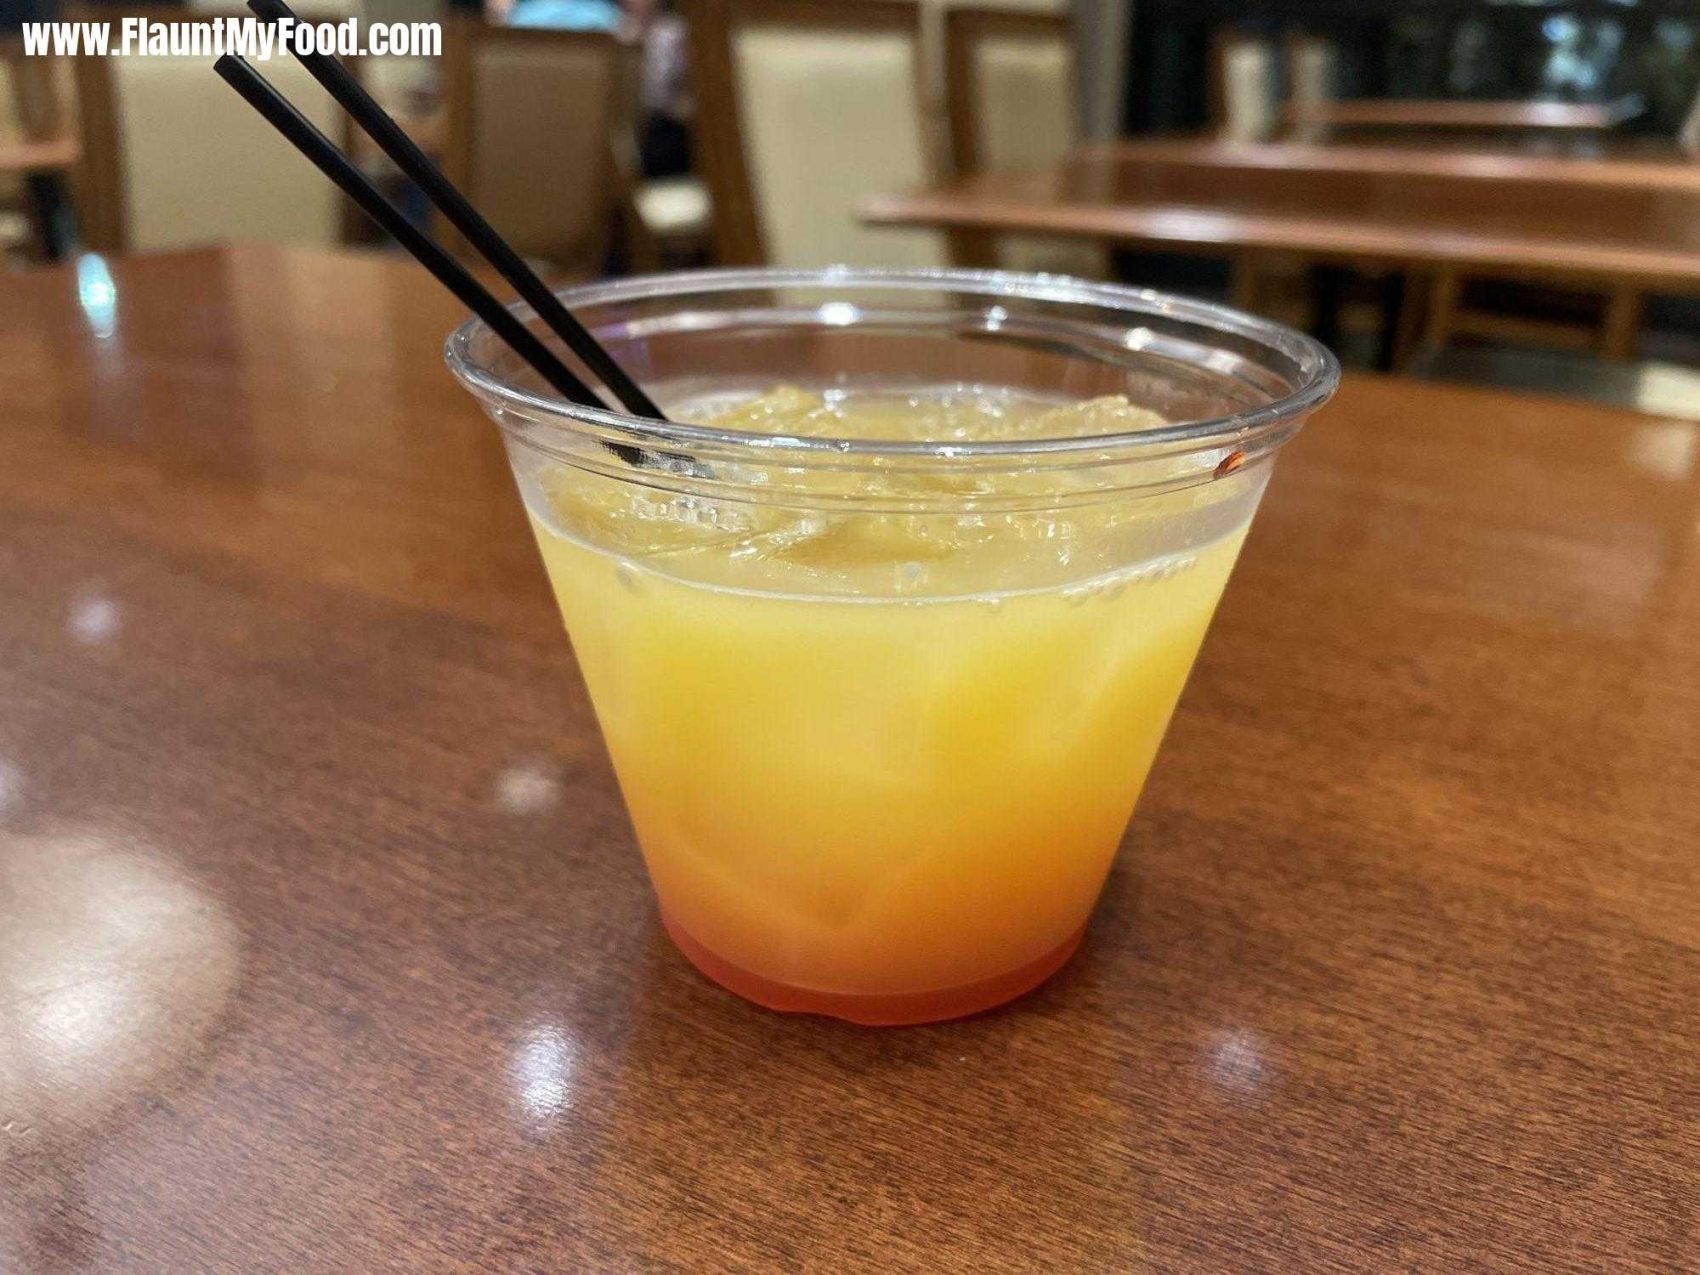 Tequila sunrise at Embassy suites on the Riverwalk in downtown San Antonio Texas